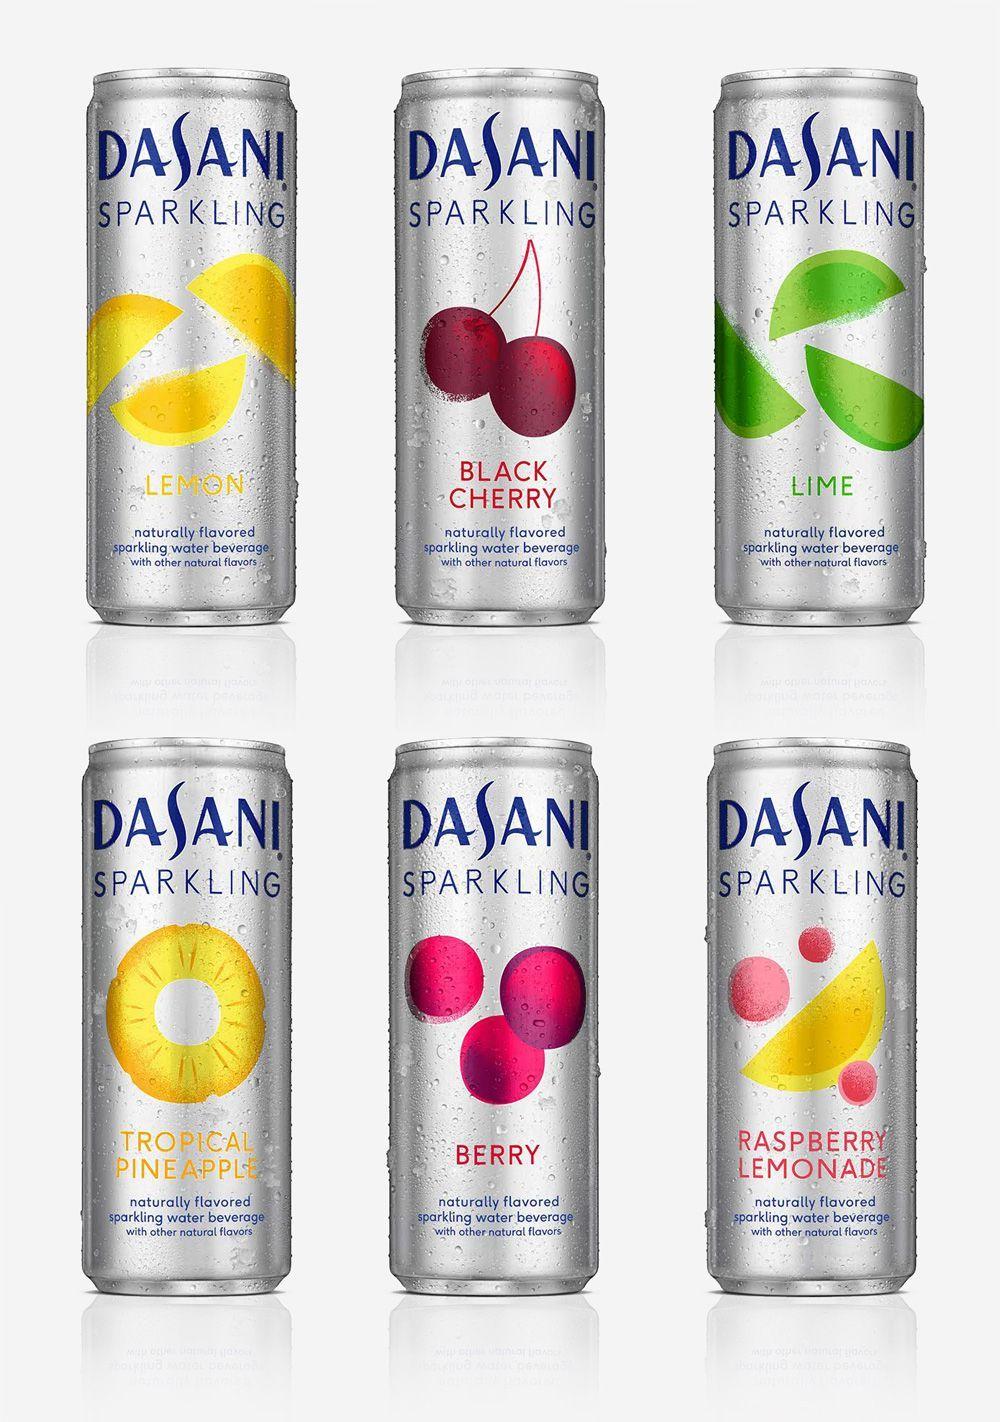 Dasani Water Logo - New Logo and Packaging for Dasani Sparkling by Moniker | Brand New ...